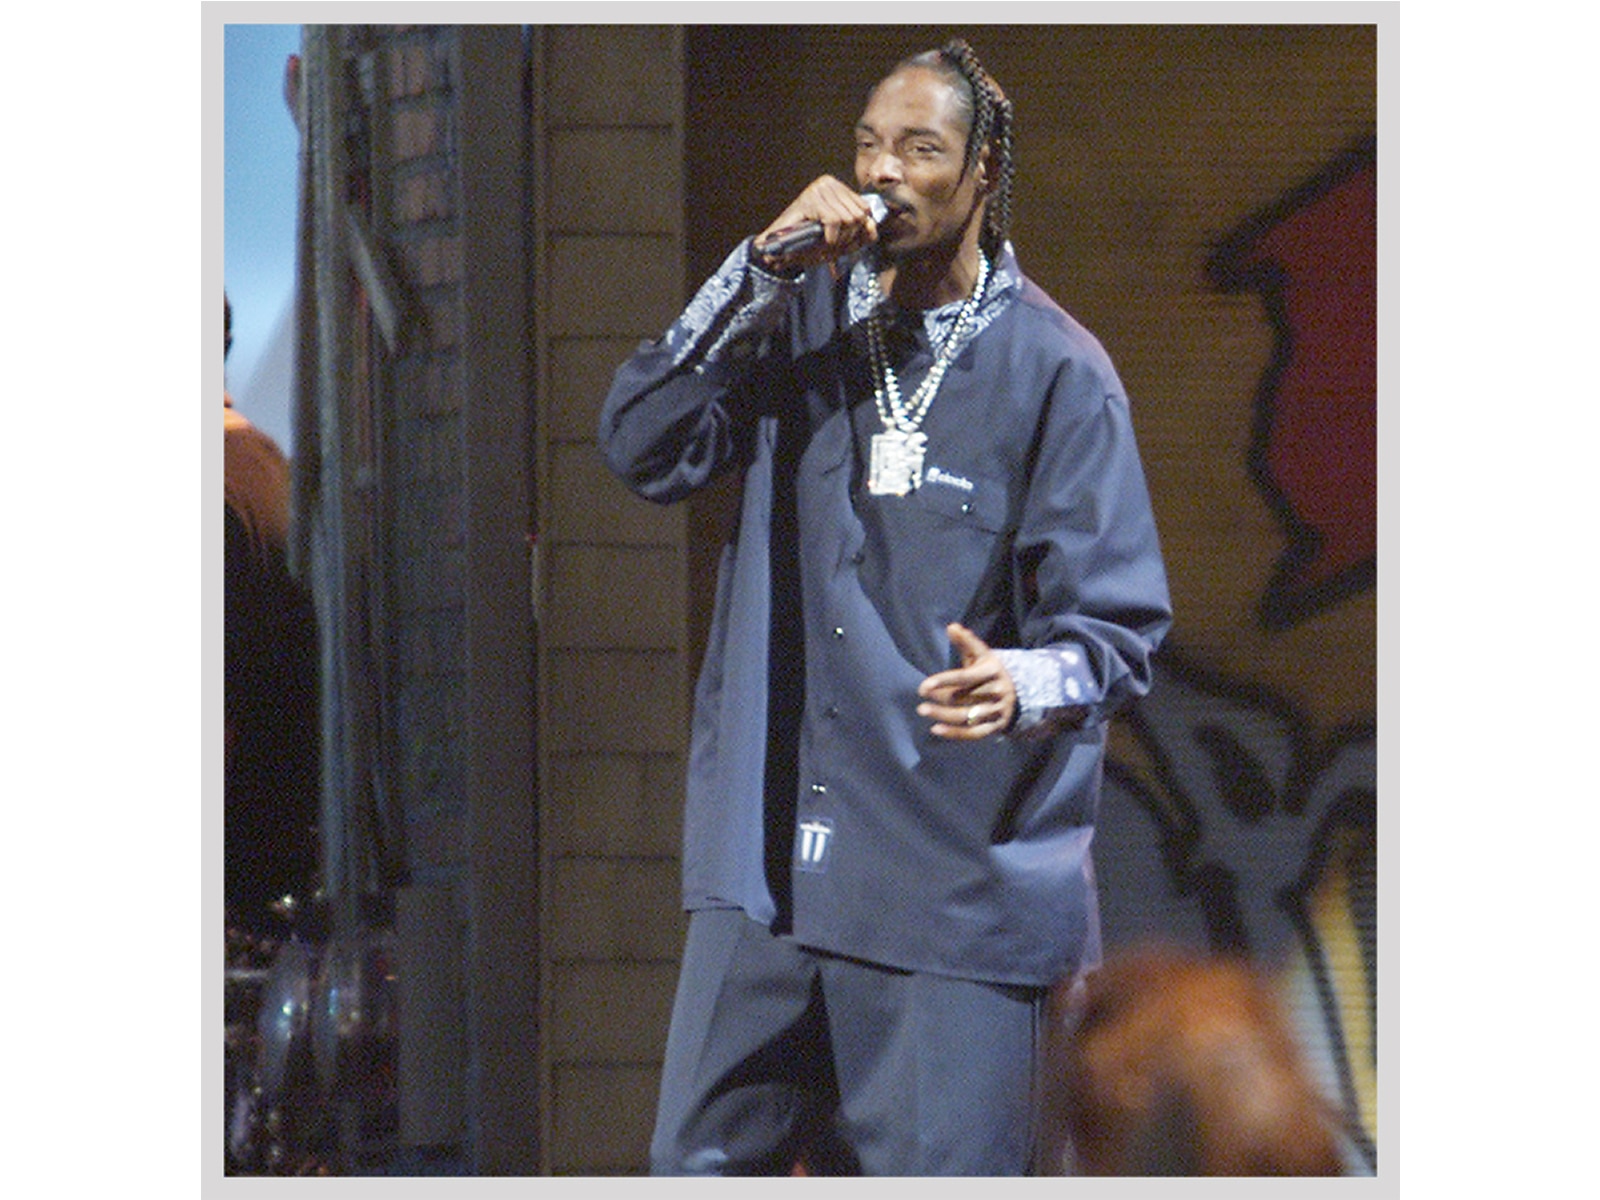 Five (Doggy) Style Lessons From Snoop Dogg | The Journal | MR PORTER